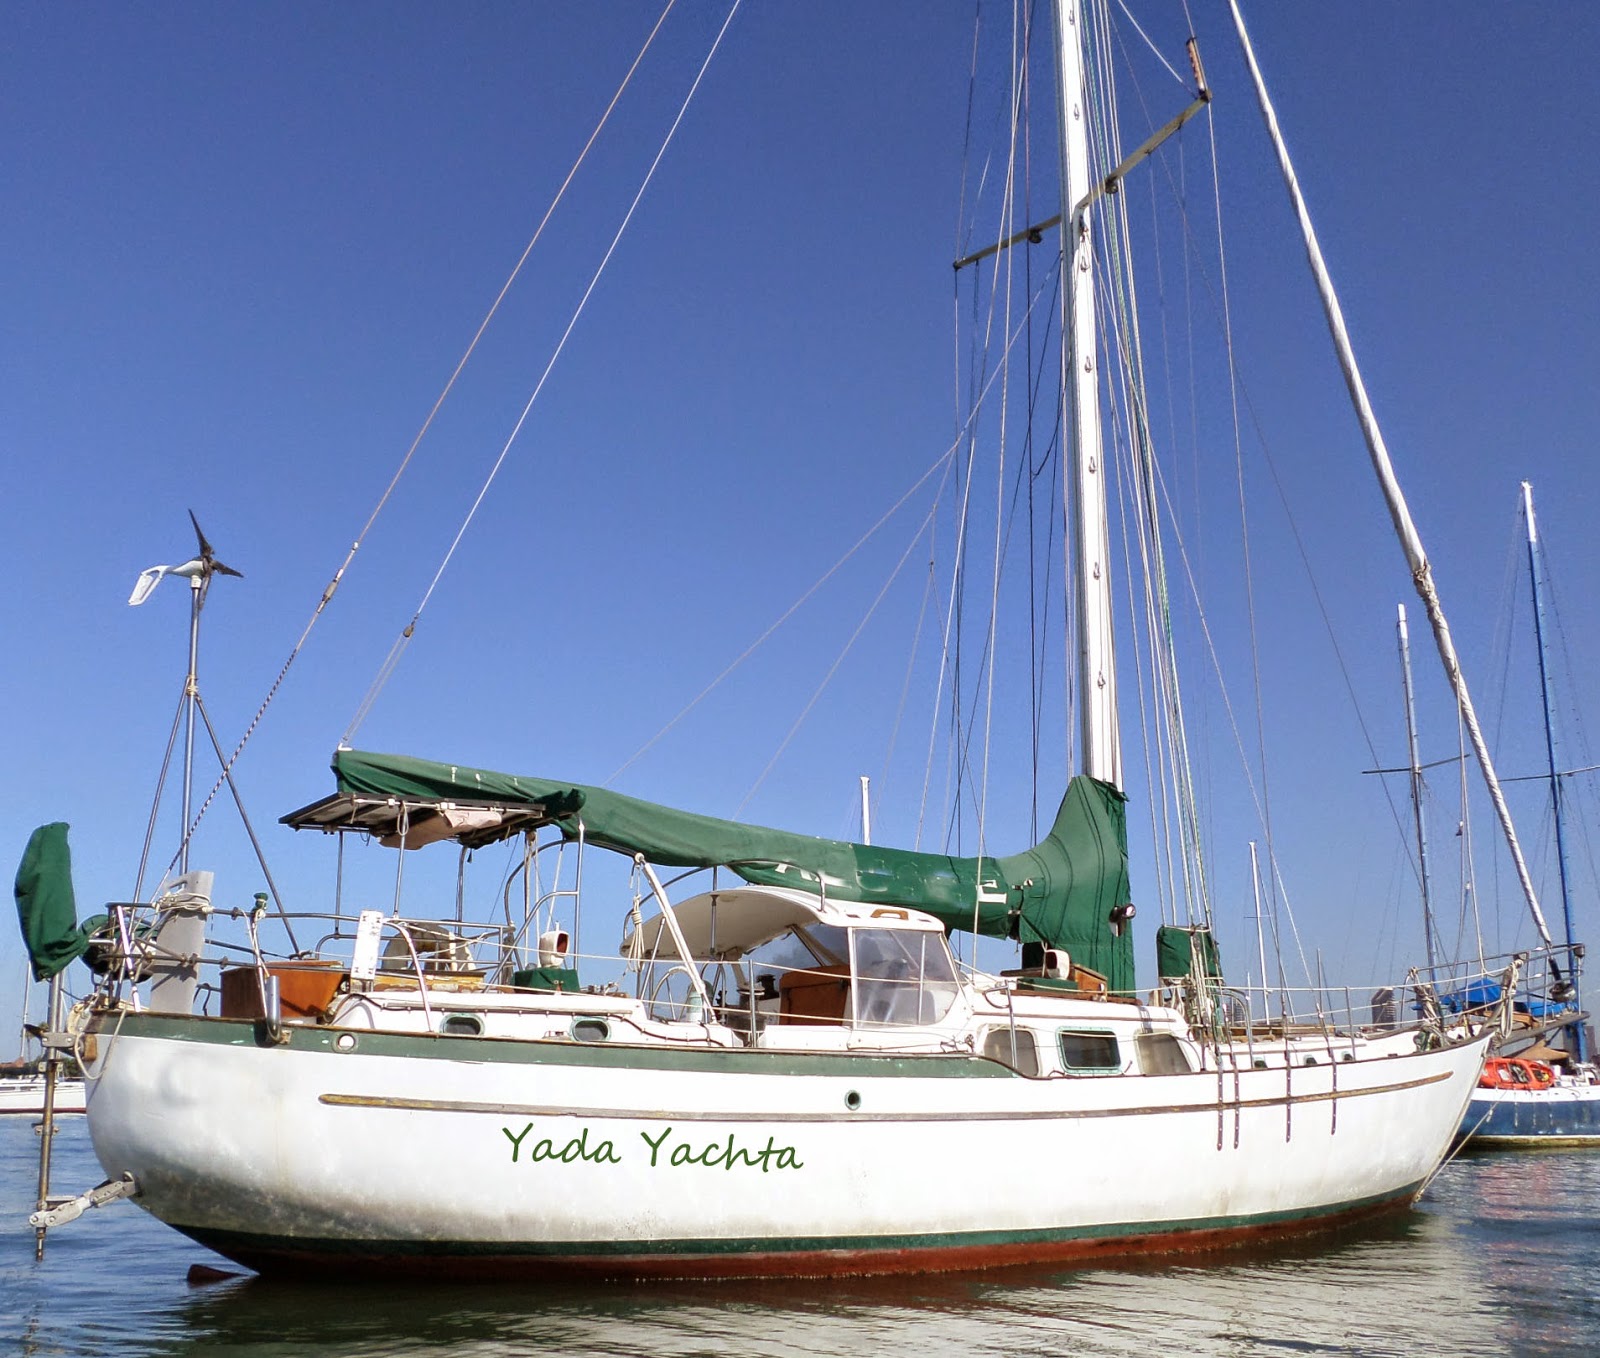 captain curran's sailing blog: clever boat names and the